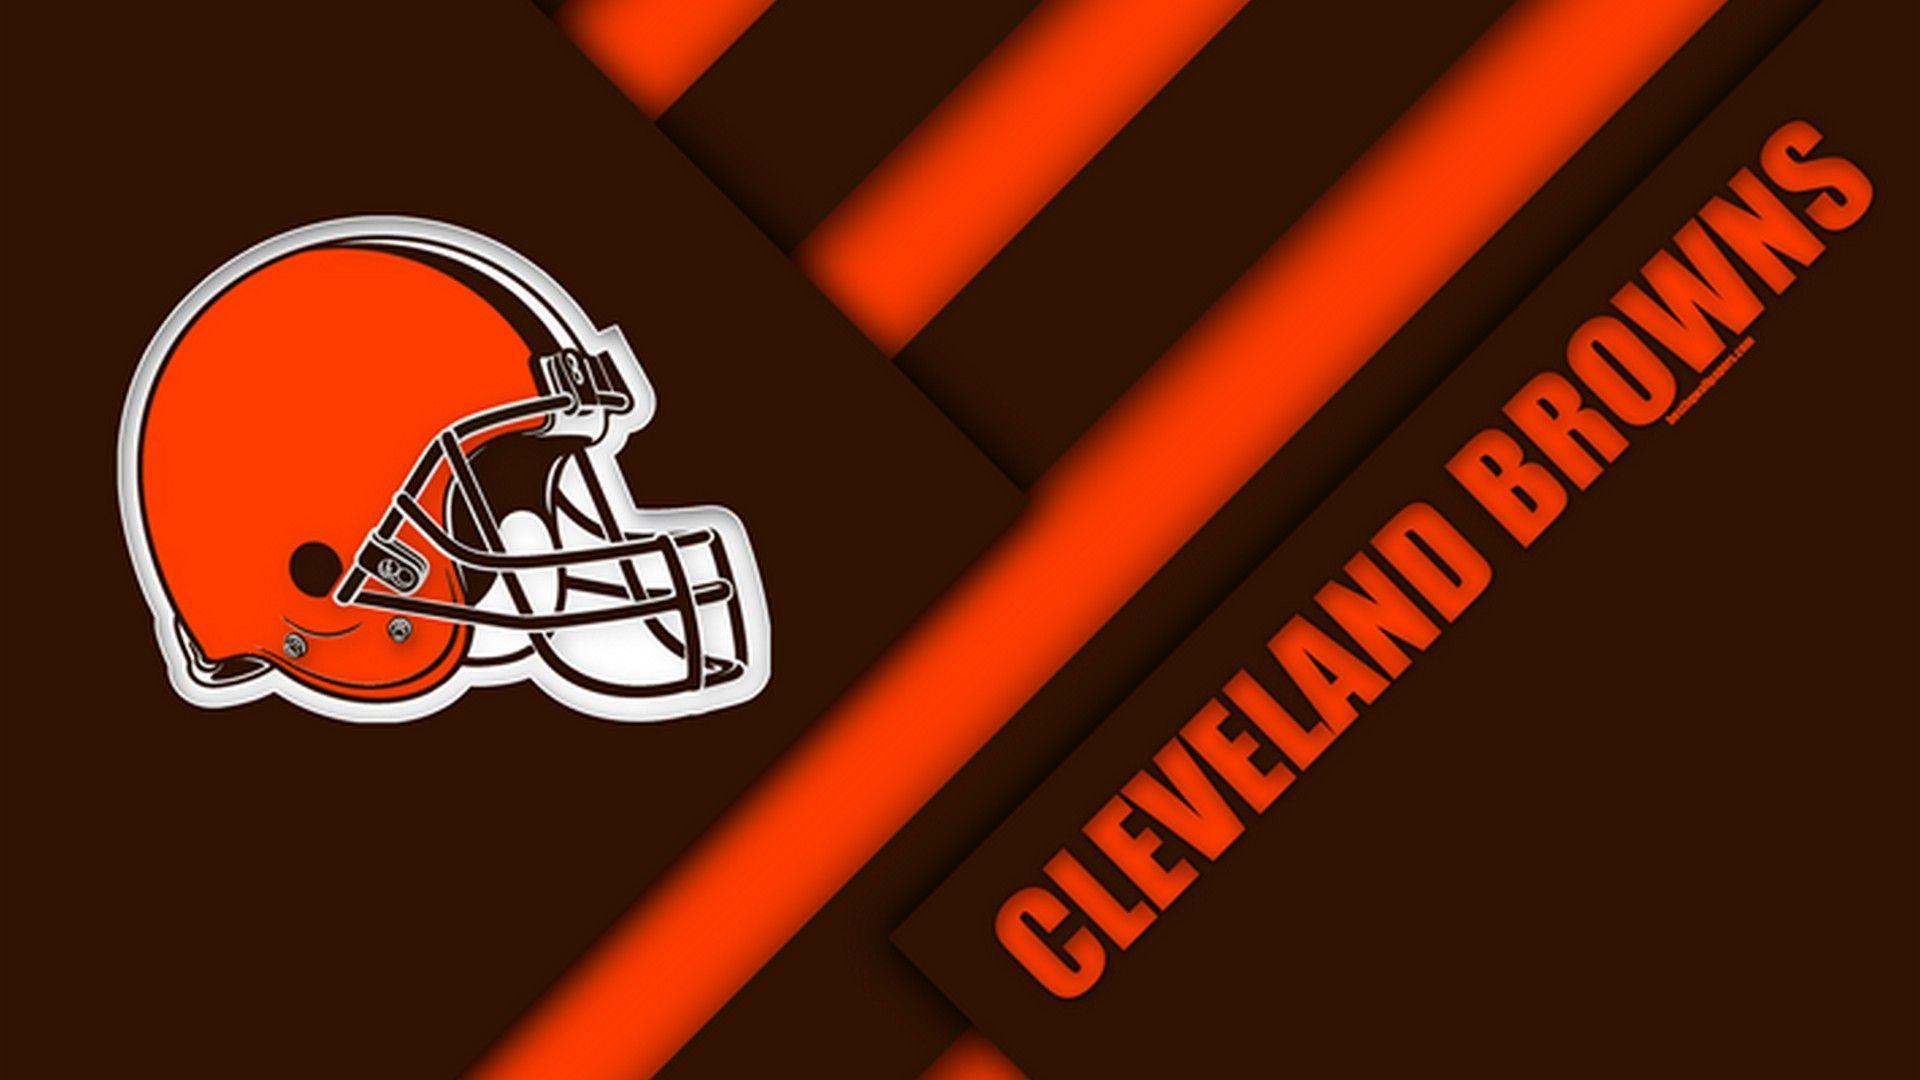 Aggregate 66+ wallpaper cleveland browns best - in.cdgdbentre